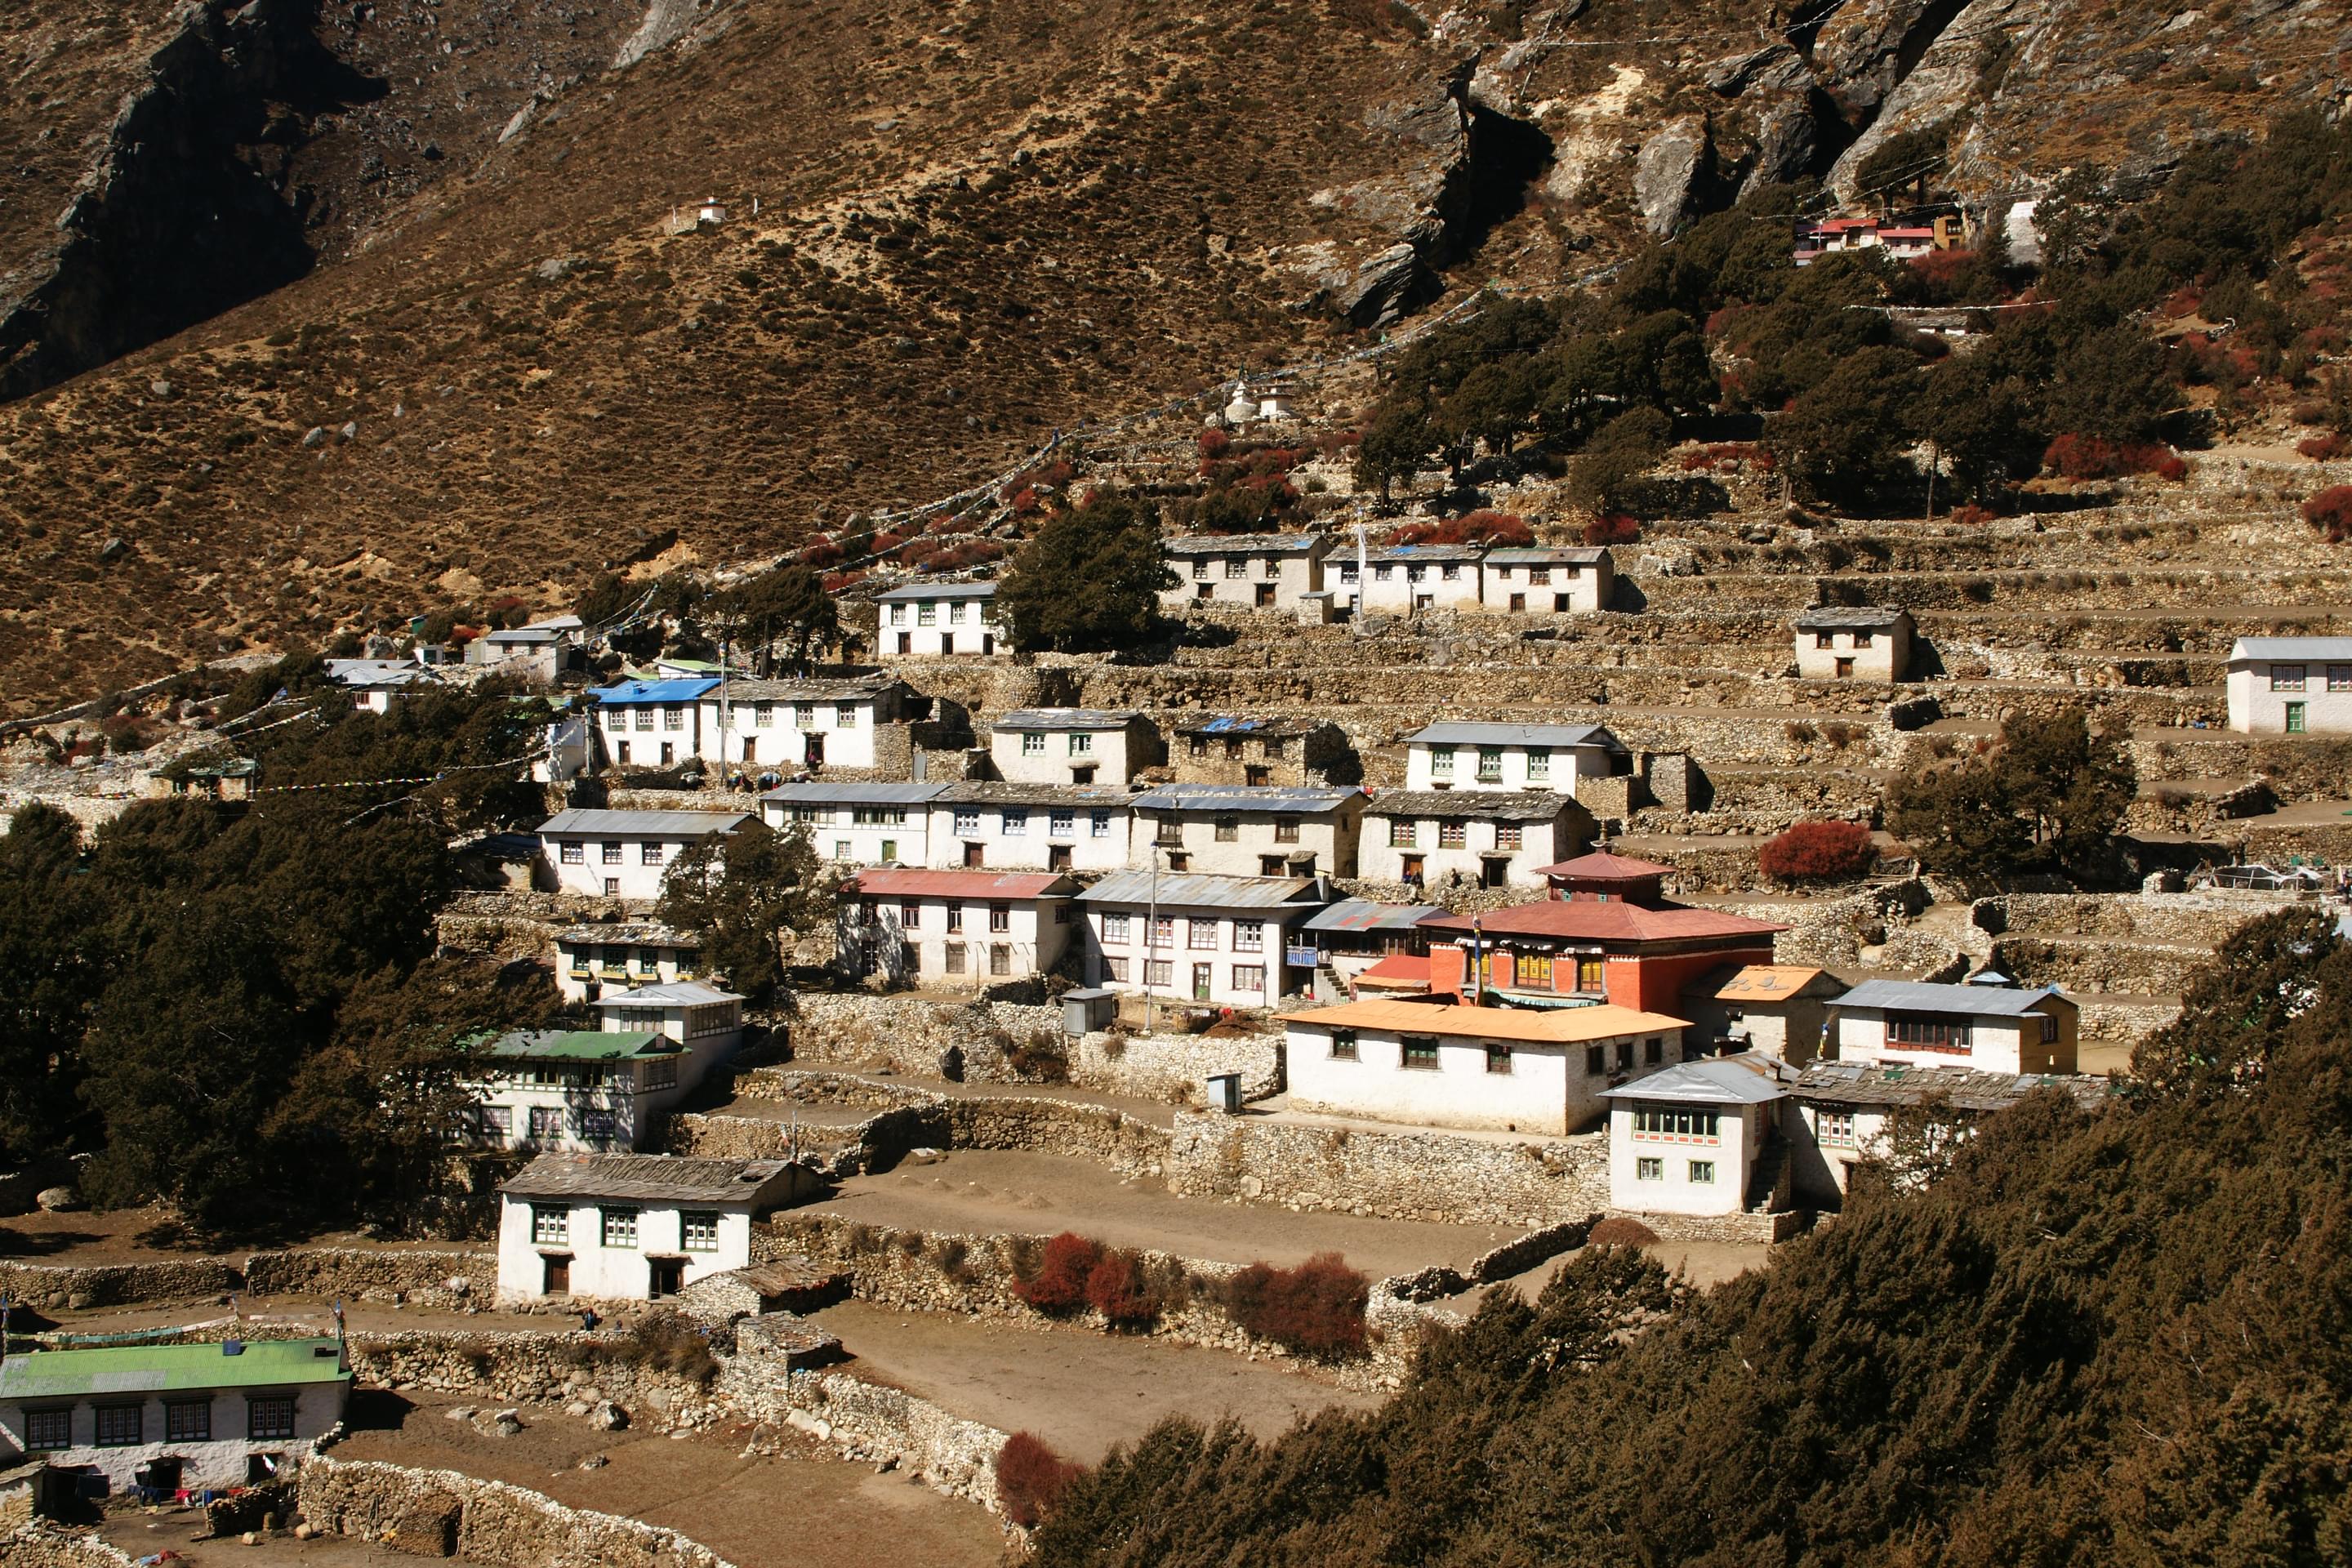 Pangboche Overview